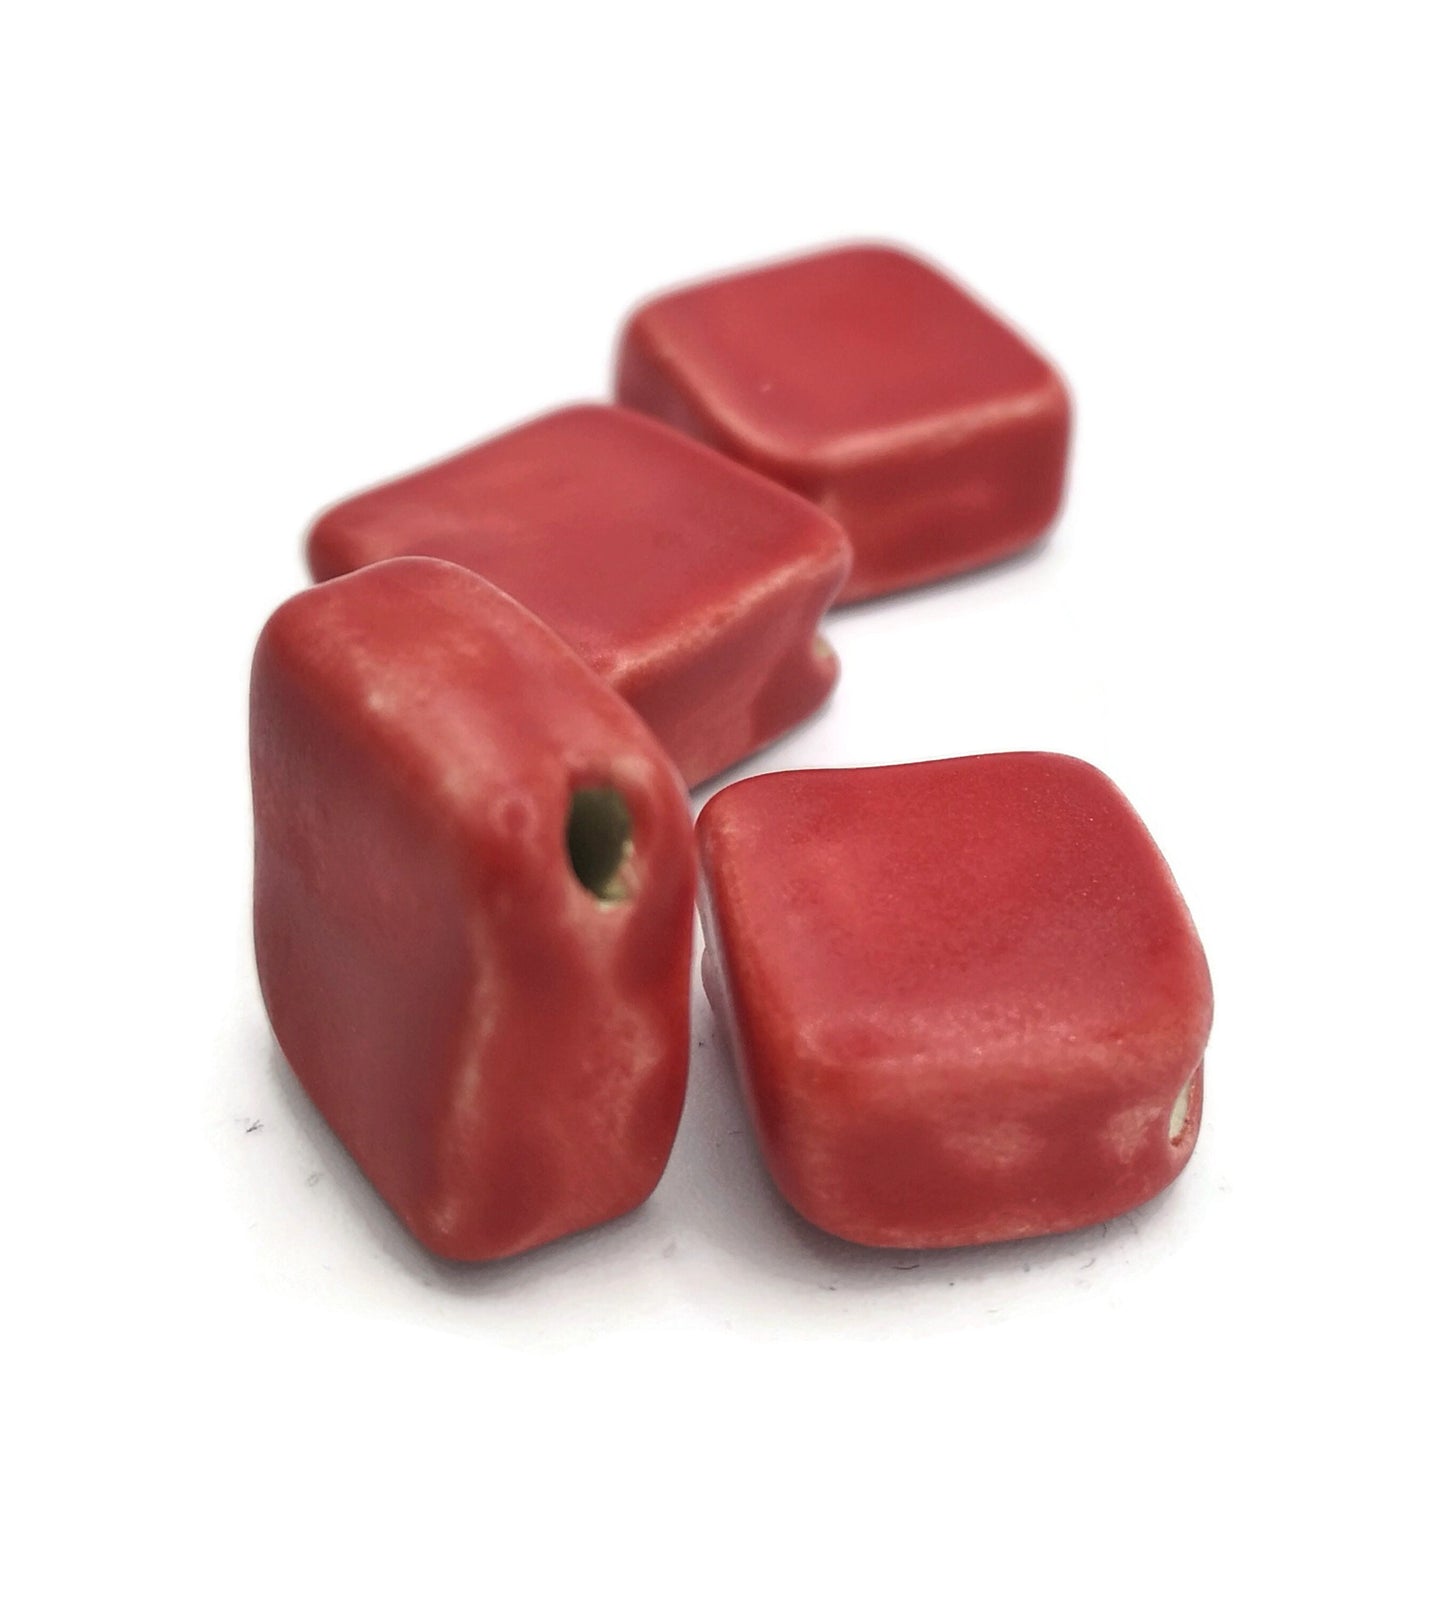 4Pc 20mm Large Square Handmade Ceramic Beads For Jewelry Making, Clay Decorative Unique Beads, Matte Red Macrame Beads Large Hole 2mm - Ceramica Ana Rafael